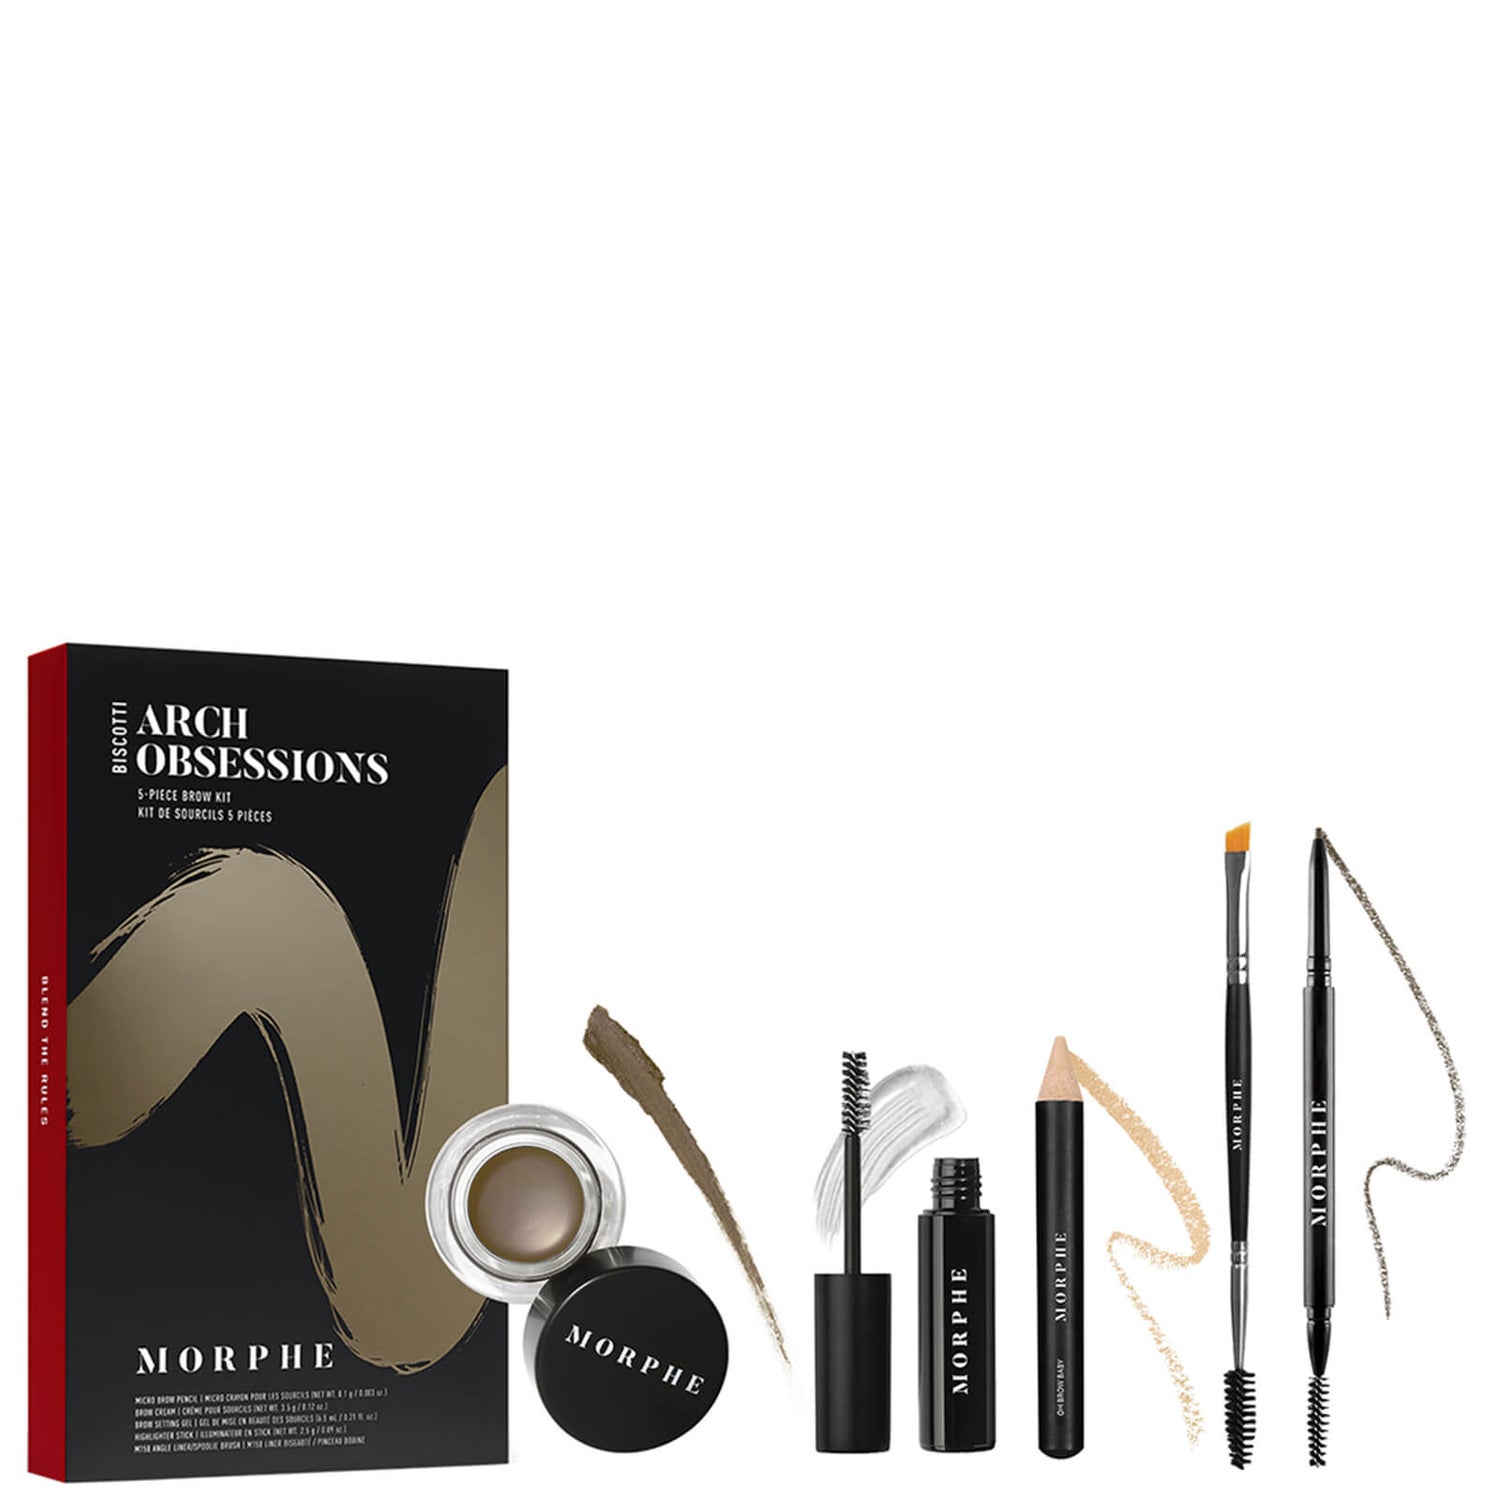 Morphe Arch Obsessions 5-Piece Brow Kit (Various Shades) (Worth £34.00)